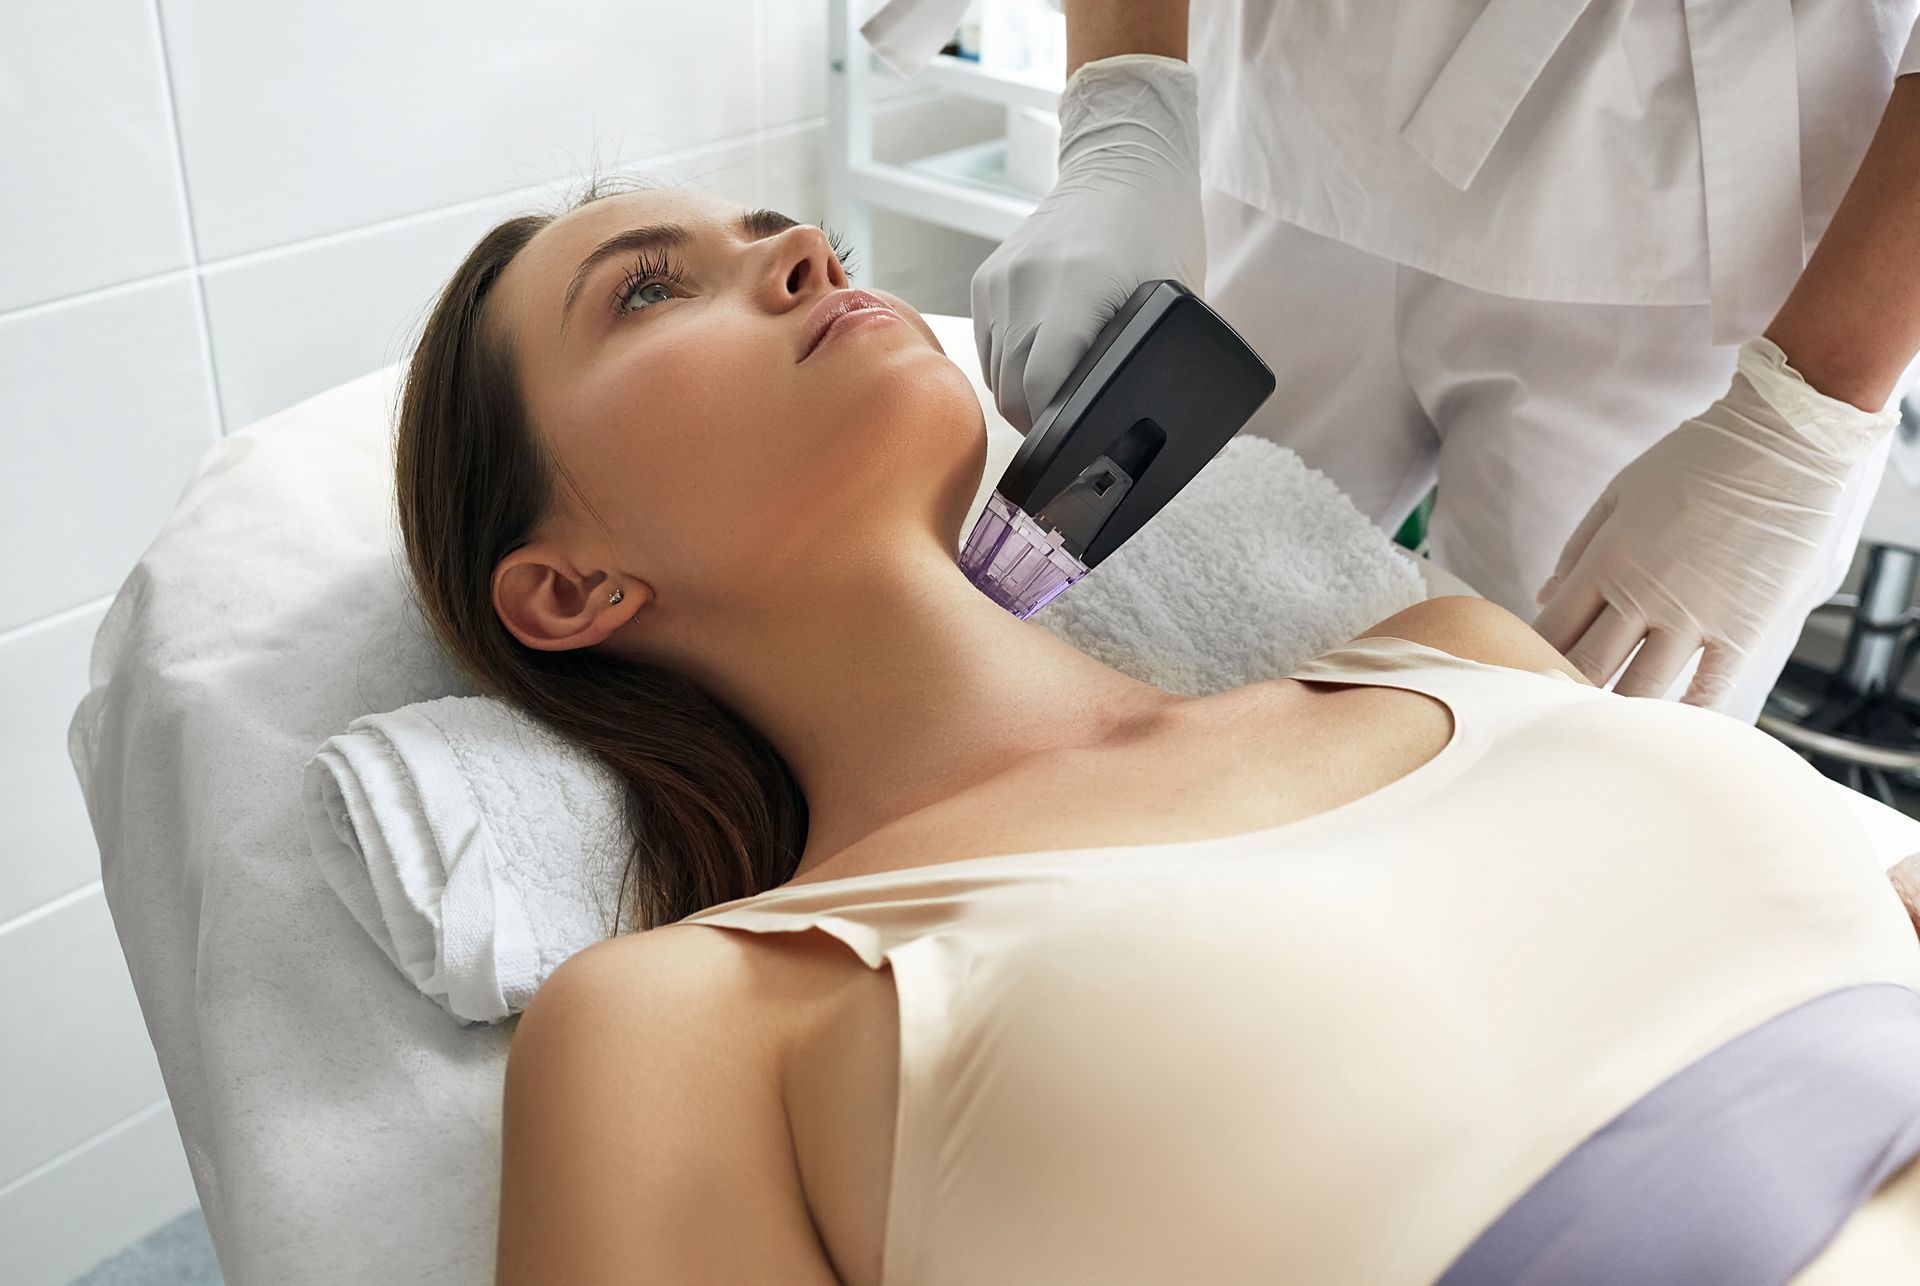 a woman is laying on a bed getting a laser treatment on her face.